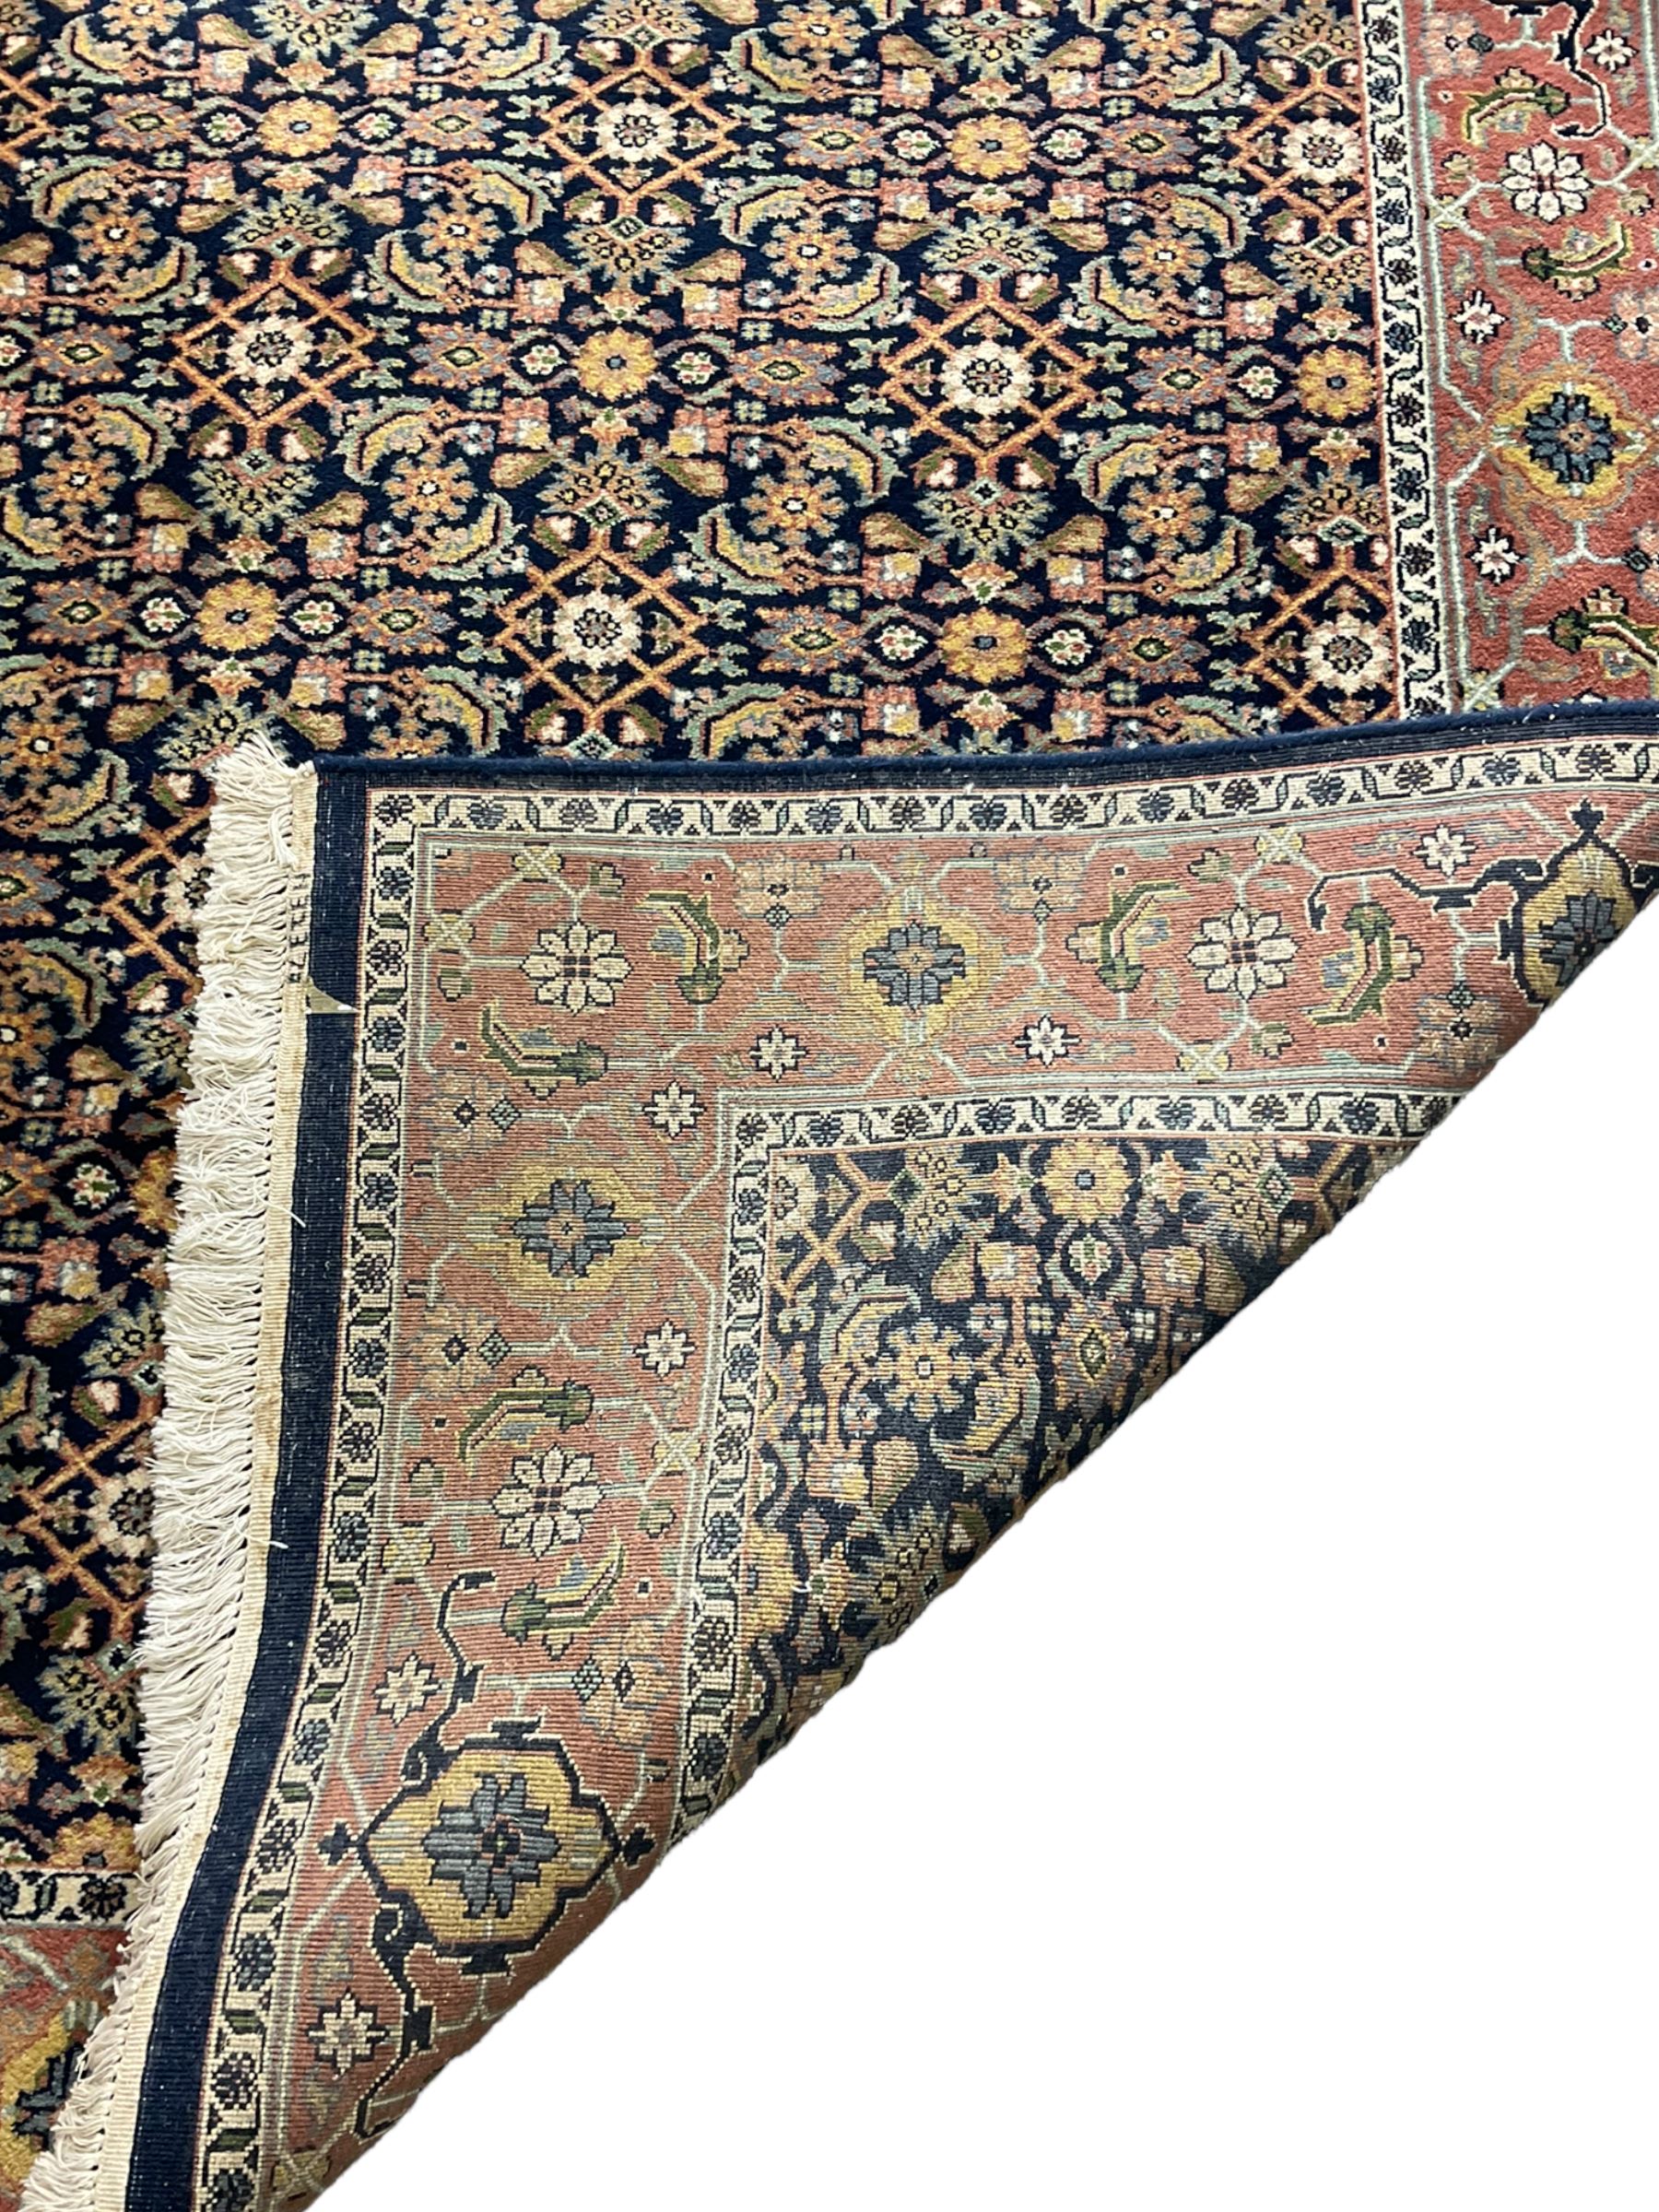 Persian blue ground rug - Image 4 of 4